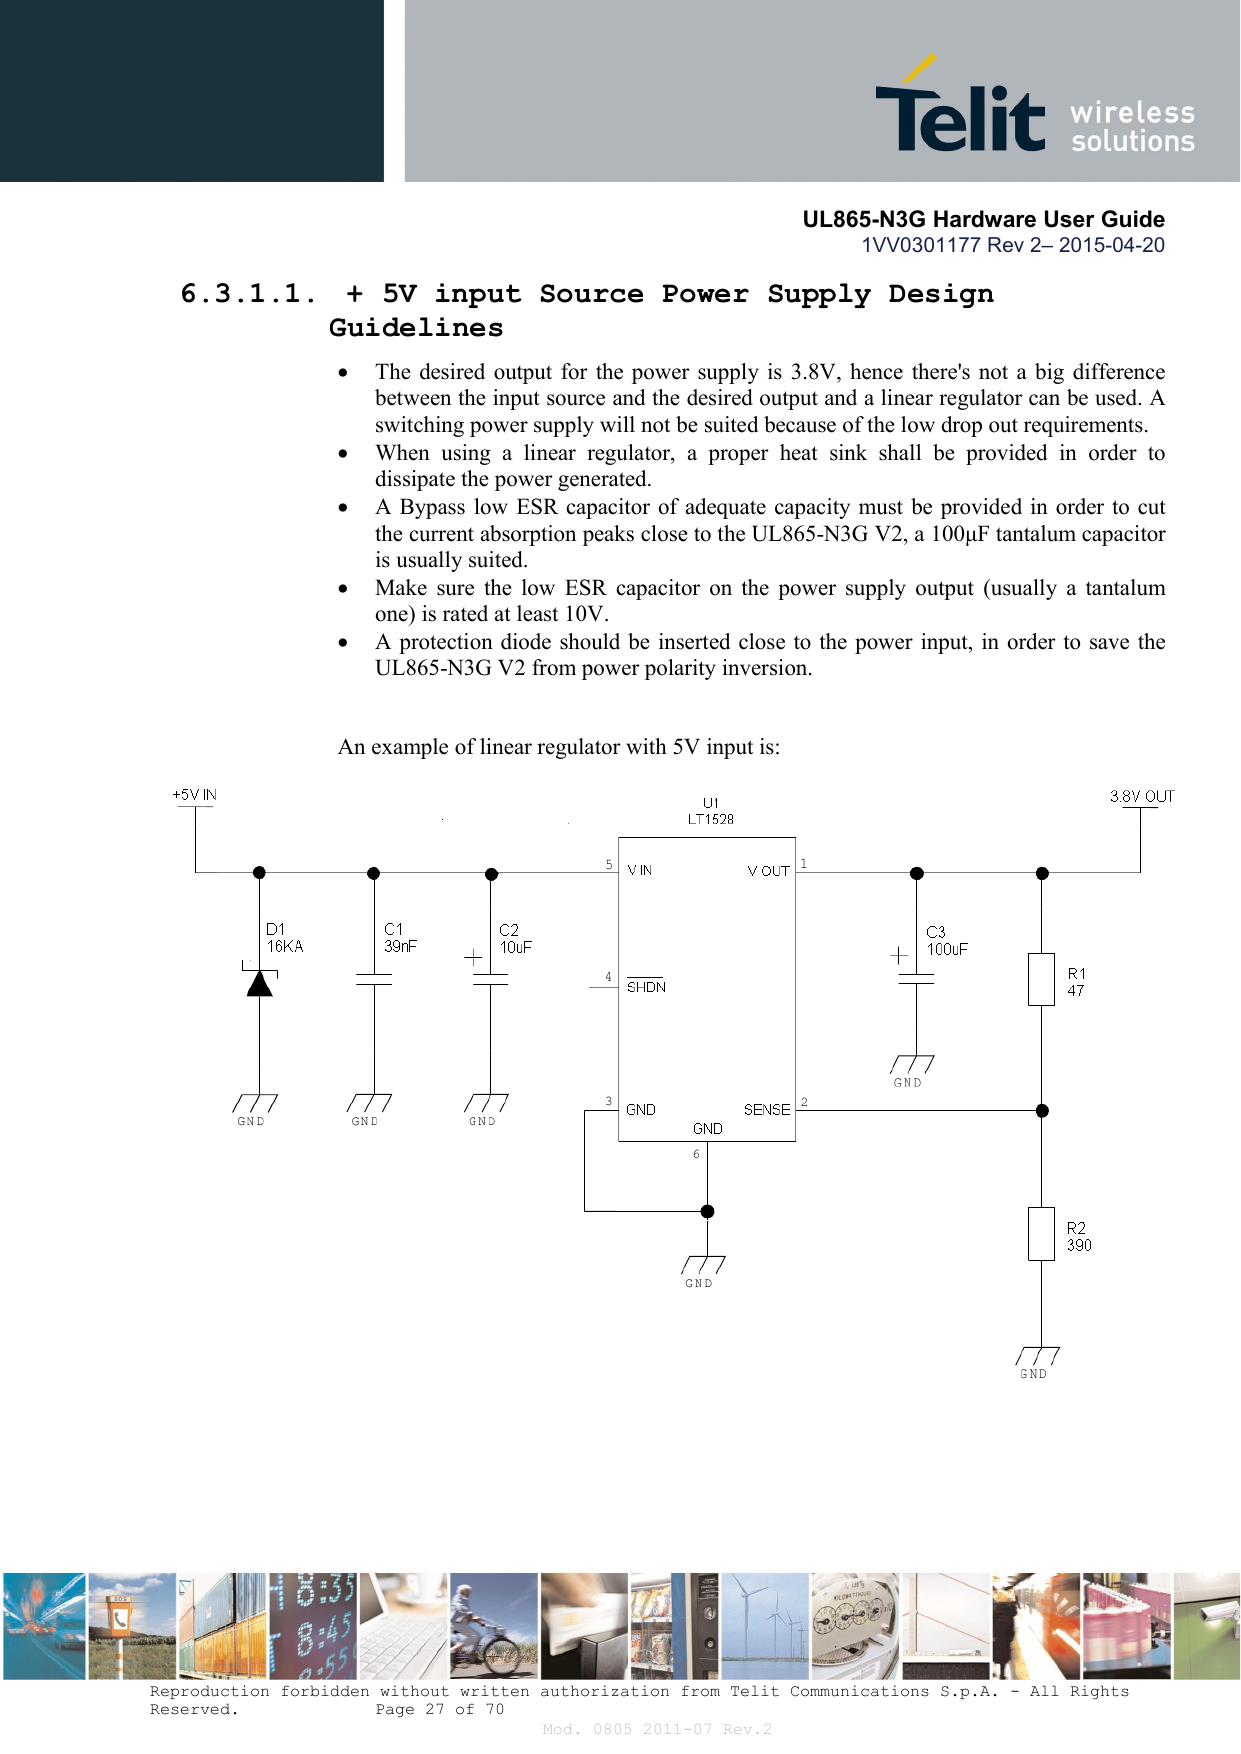       UL865-N3G Hardware User Guide 1VV0301177 Rev 2– 2015-04-20  Reproduction forbidden without written authorization from Telit Communications S.p.A. - All Rights Reserved.    Page 27 of 70 Mod. 0805 2011-07 Rev.2 6.3.1.1.  + 5V input Source Power Supply Design Guidelines  The  desired output for  the power  supply  is 3.8V,  hence there&apos;s  not a  big  difference between the input source and the desired output and a linear regulator can be used. A switching power supply will not be suited because of the low drop out requirements.  When  using  a  linear  regulator,  a  proper  heat  sink  shall  be  provided  in  order  to dissipate the power generated.  A Bypass low ESR capacitor of adequate capacity must be provided in order to cut the current absorption peaks close to the UL865-N3G V2, a 100μF tantalum capacitor is usually suited.  Make  sure  the  low  ESR  capacitor  on  the  power  supply  output  (usually  a  tantalum one) is rated at least 10V.  A protection diode should be inserted close to the power input, in order to save the UL865-N3G V2 from power polarity inversion.   An example of linear regulator with 5V input is:   